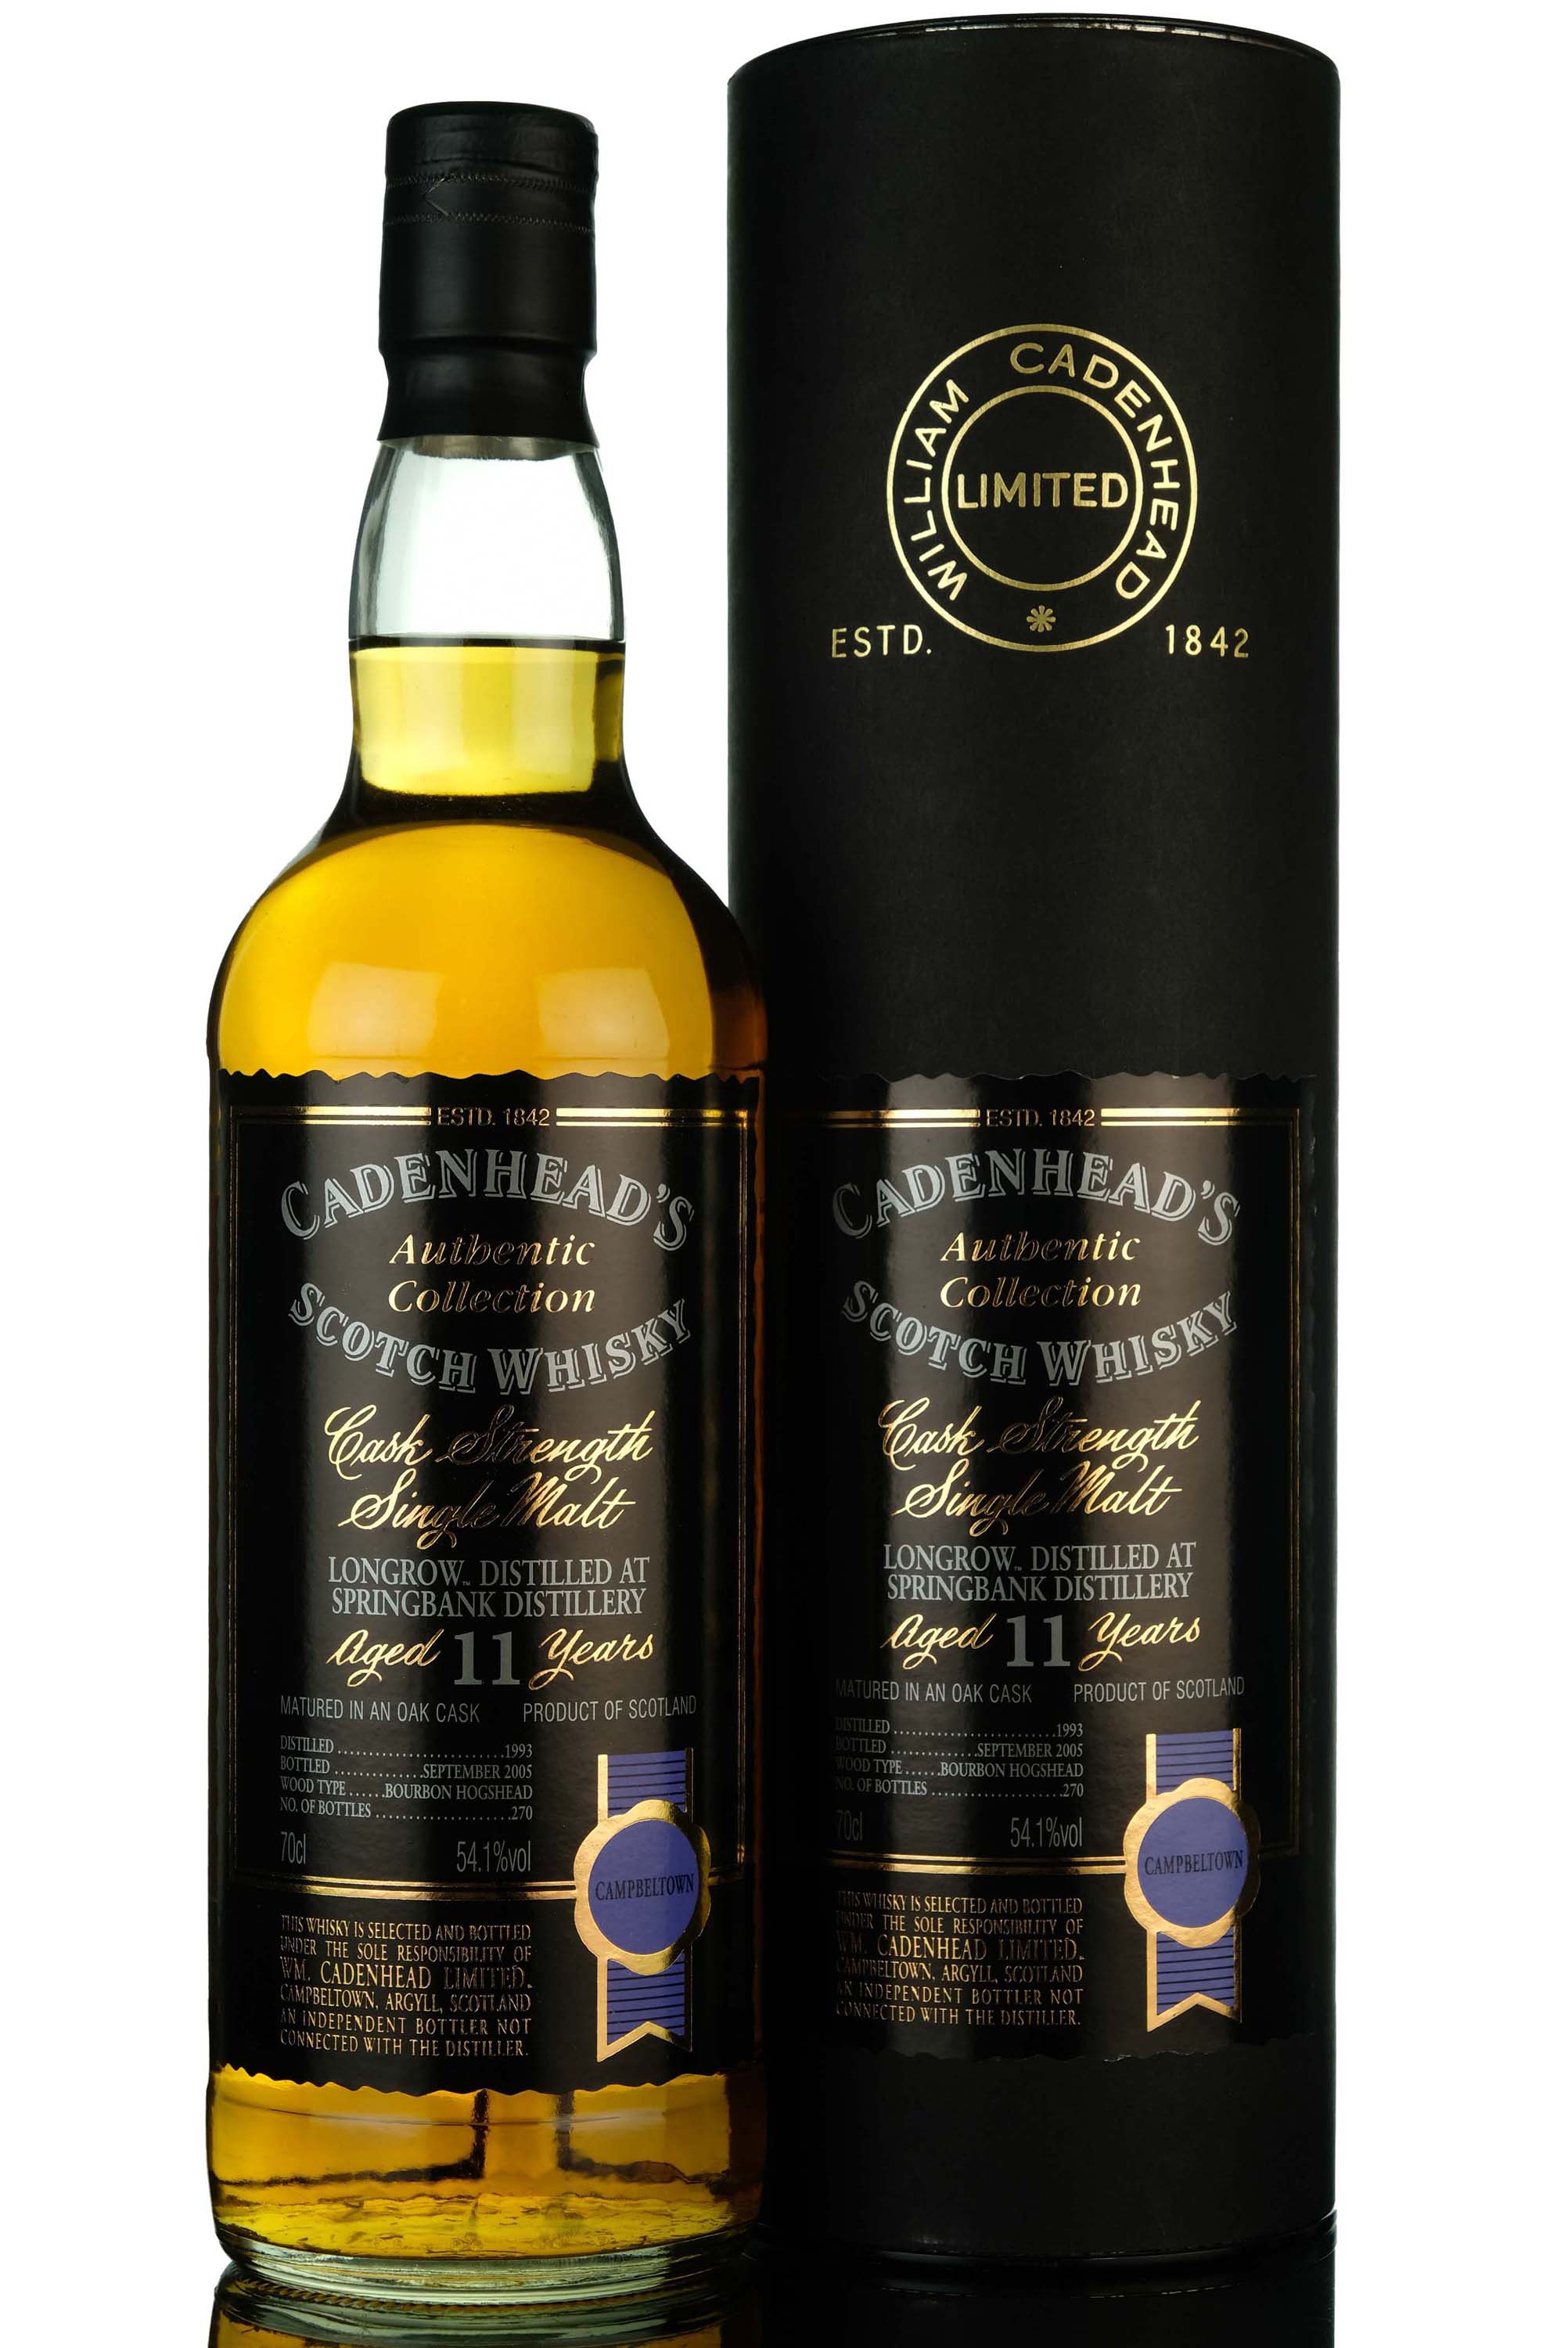 Longrow 1993-2005 - 11 Year Old - Cadenheads Authentic Collection - Single Cask